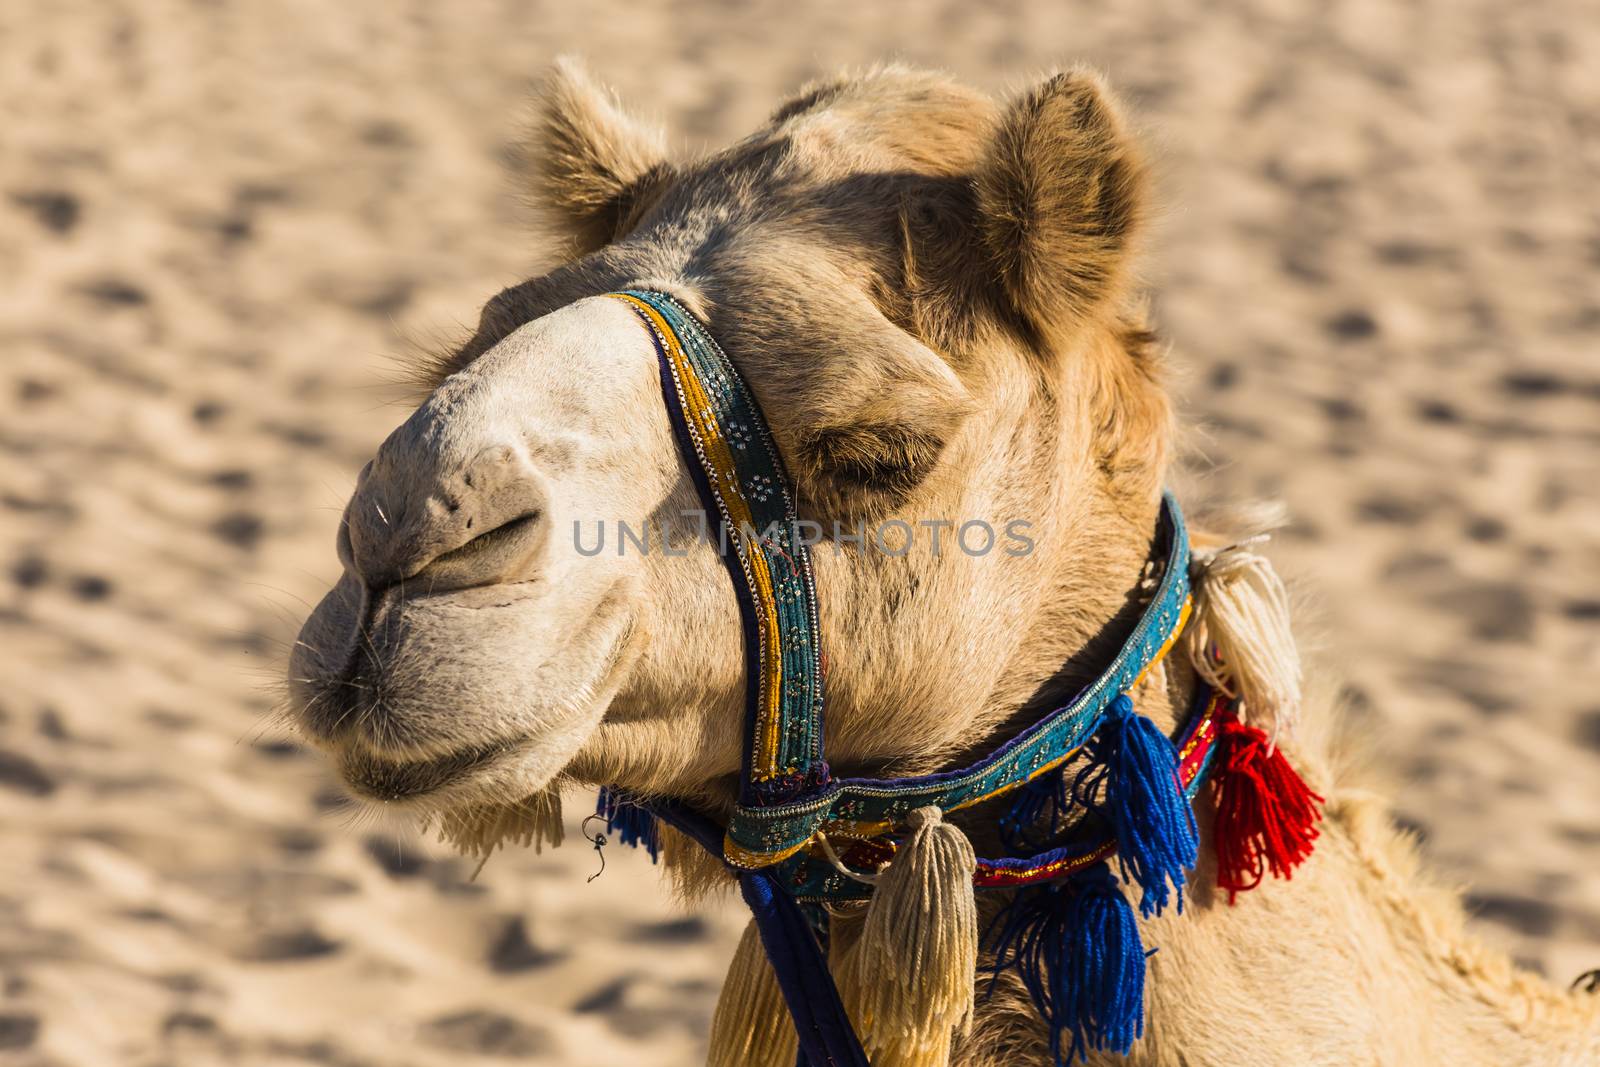 The muzzle of the camel close-up on sand background